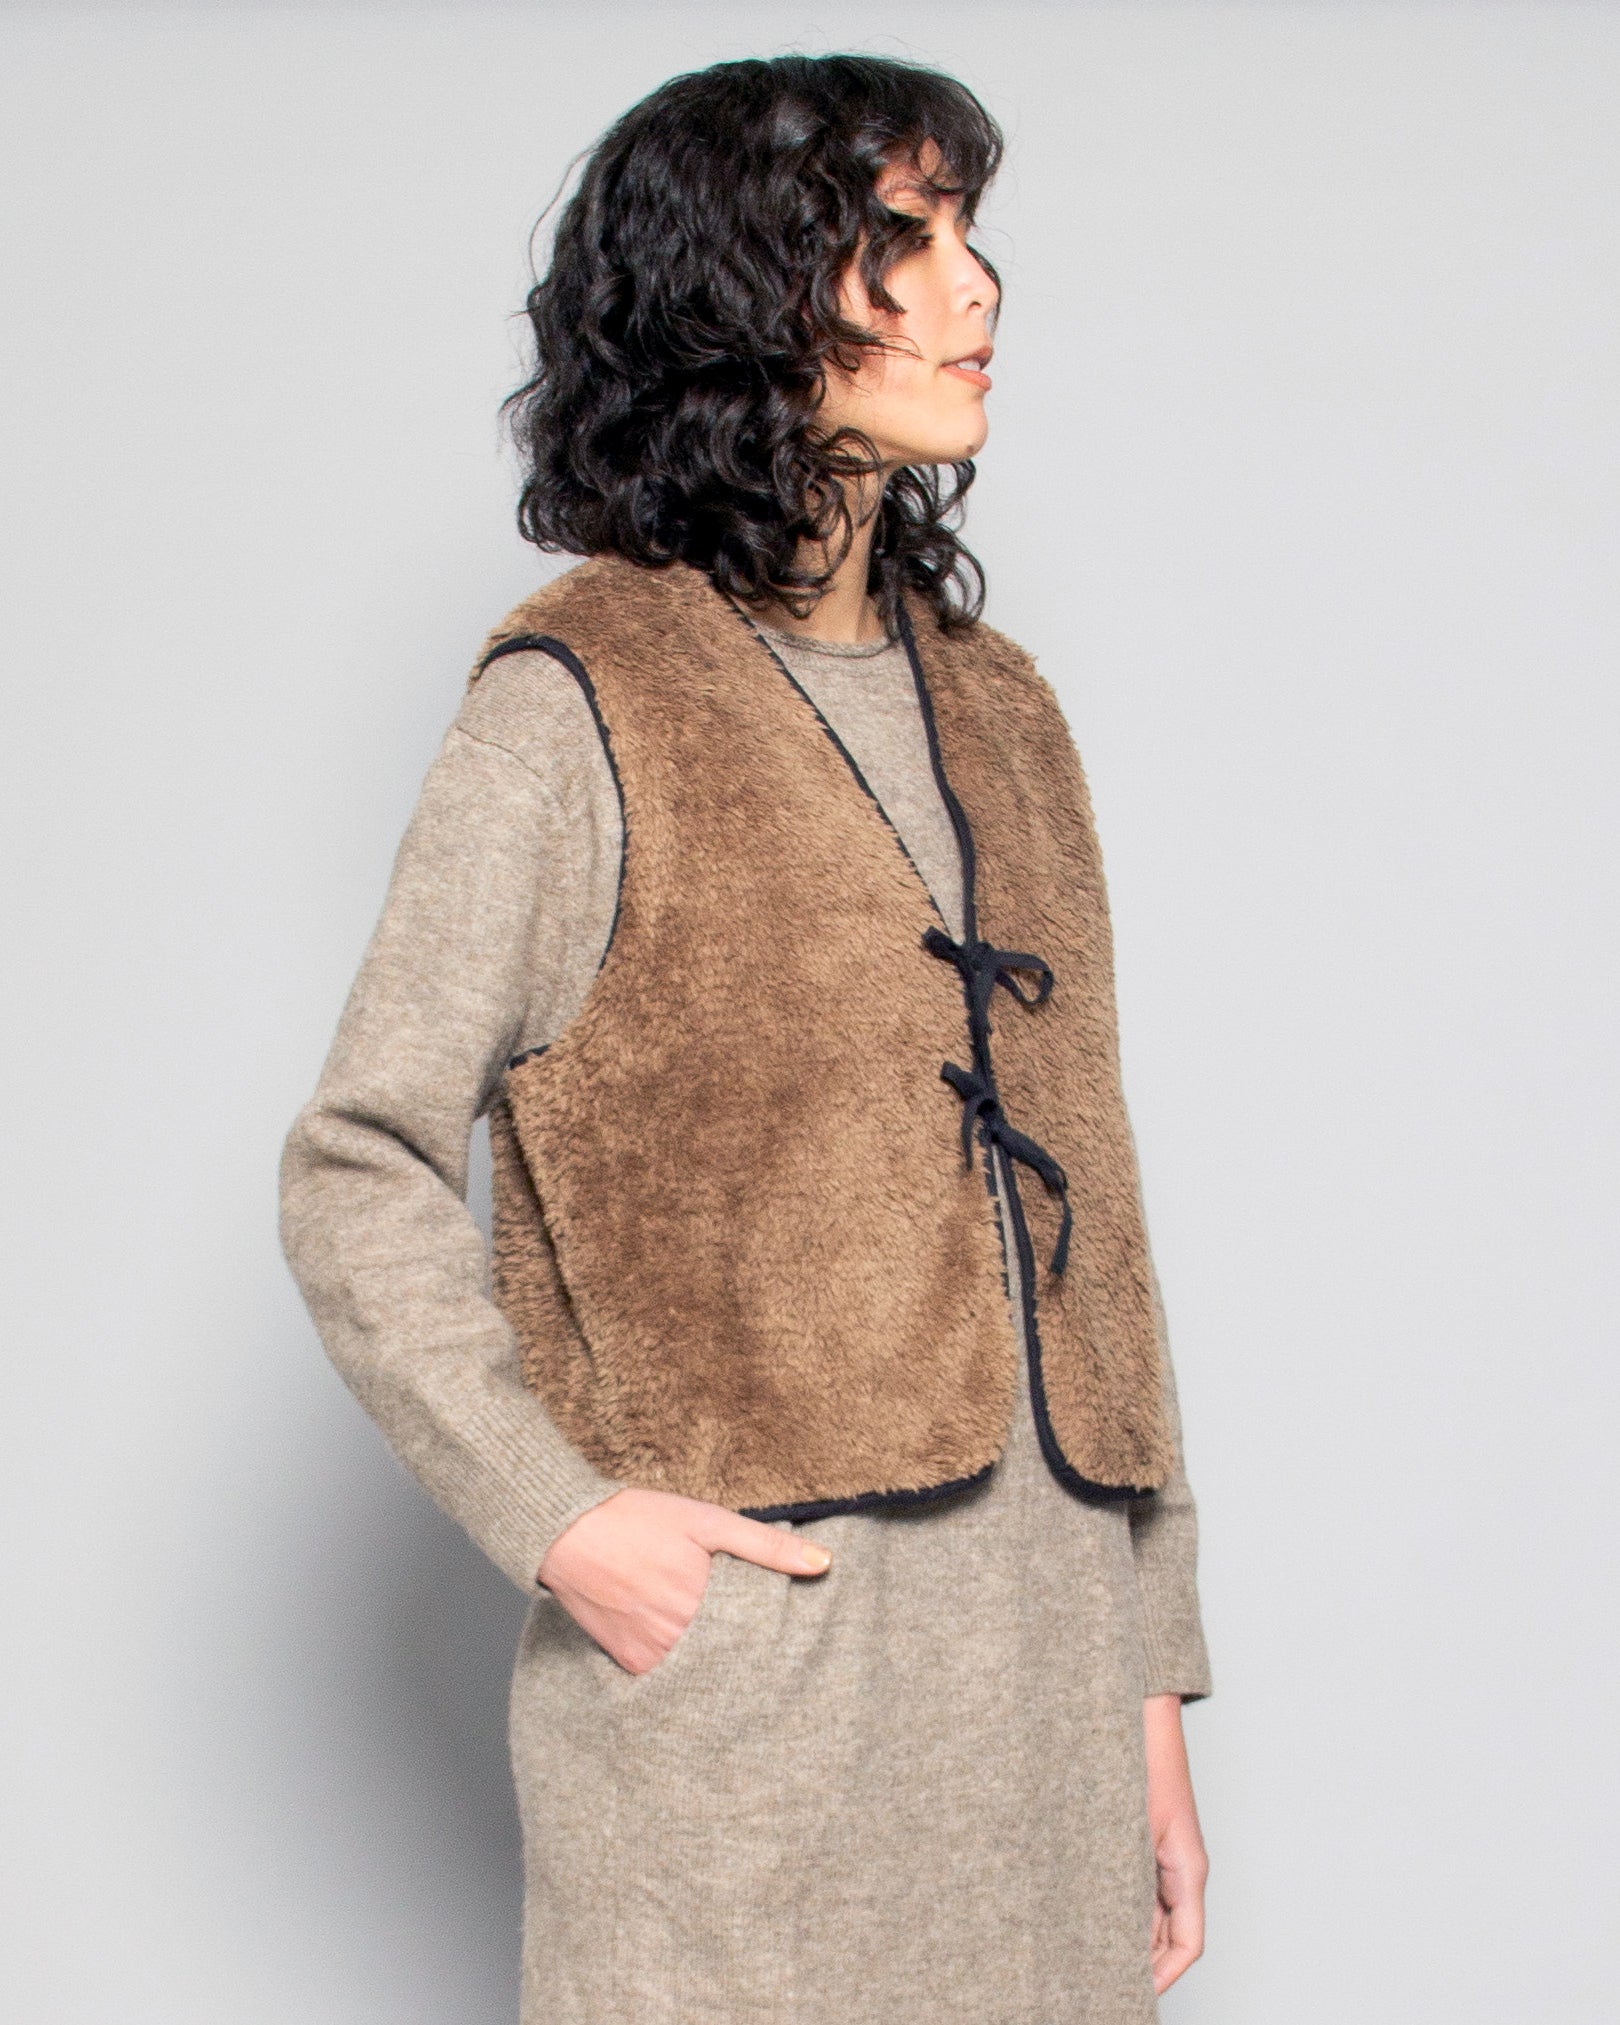 PERSONS Tate Vegan Sherpa Vest in Mocha available at Lahn.shop